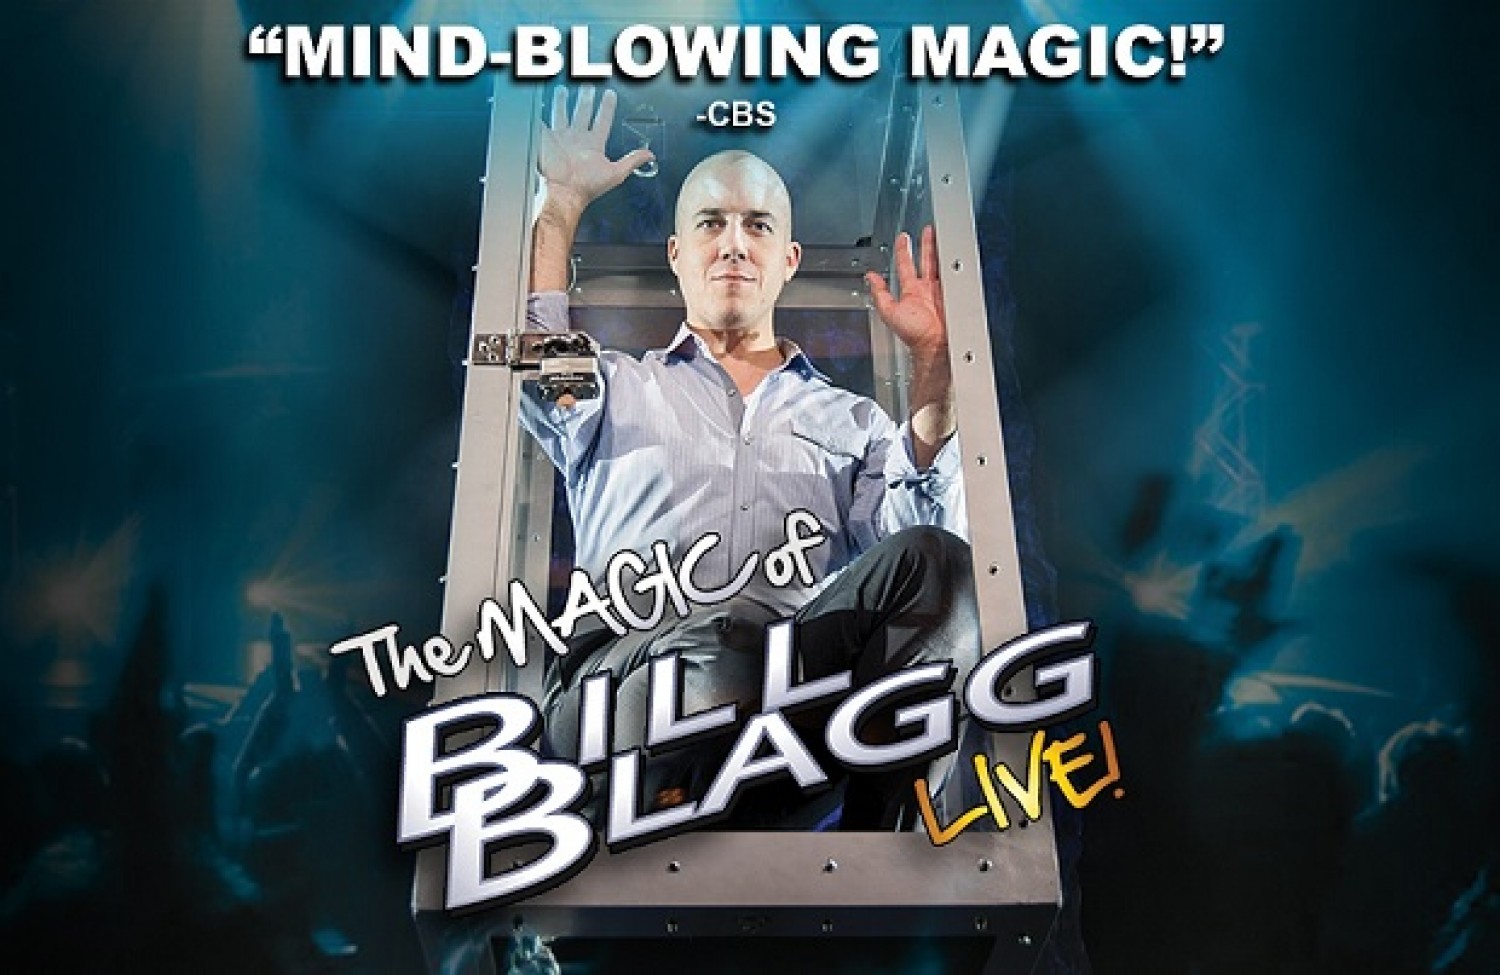 Bill Blagg at Kirby Center for the Performing Arts